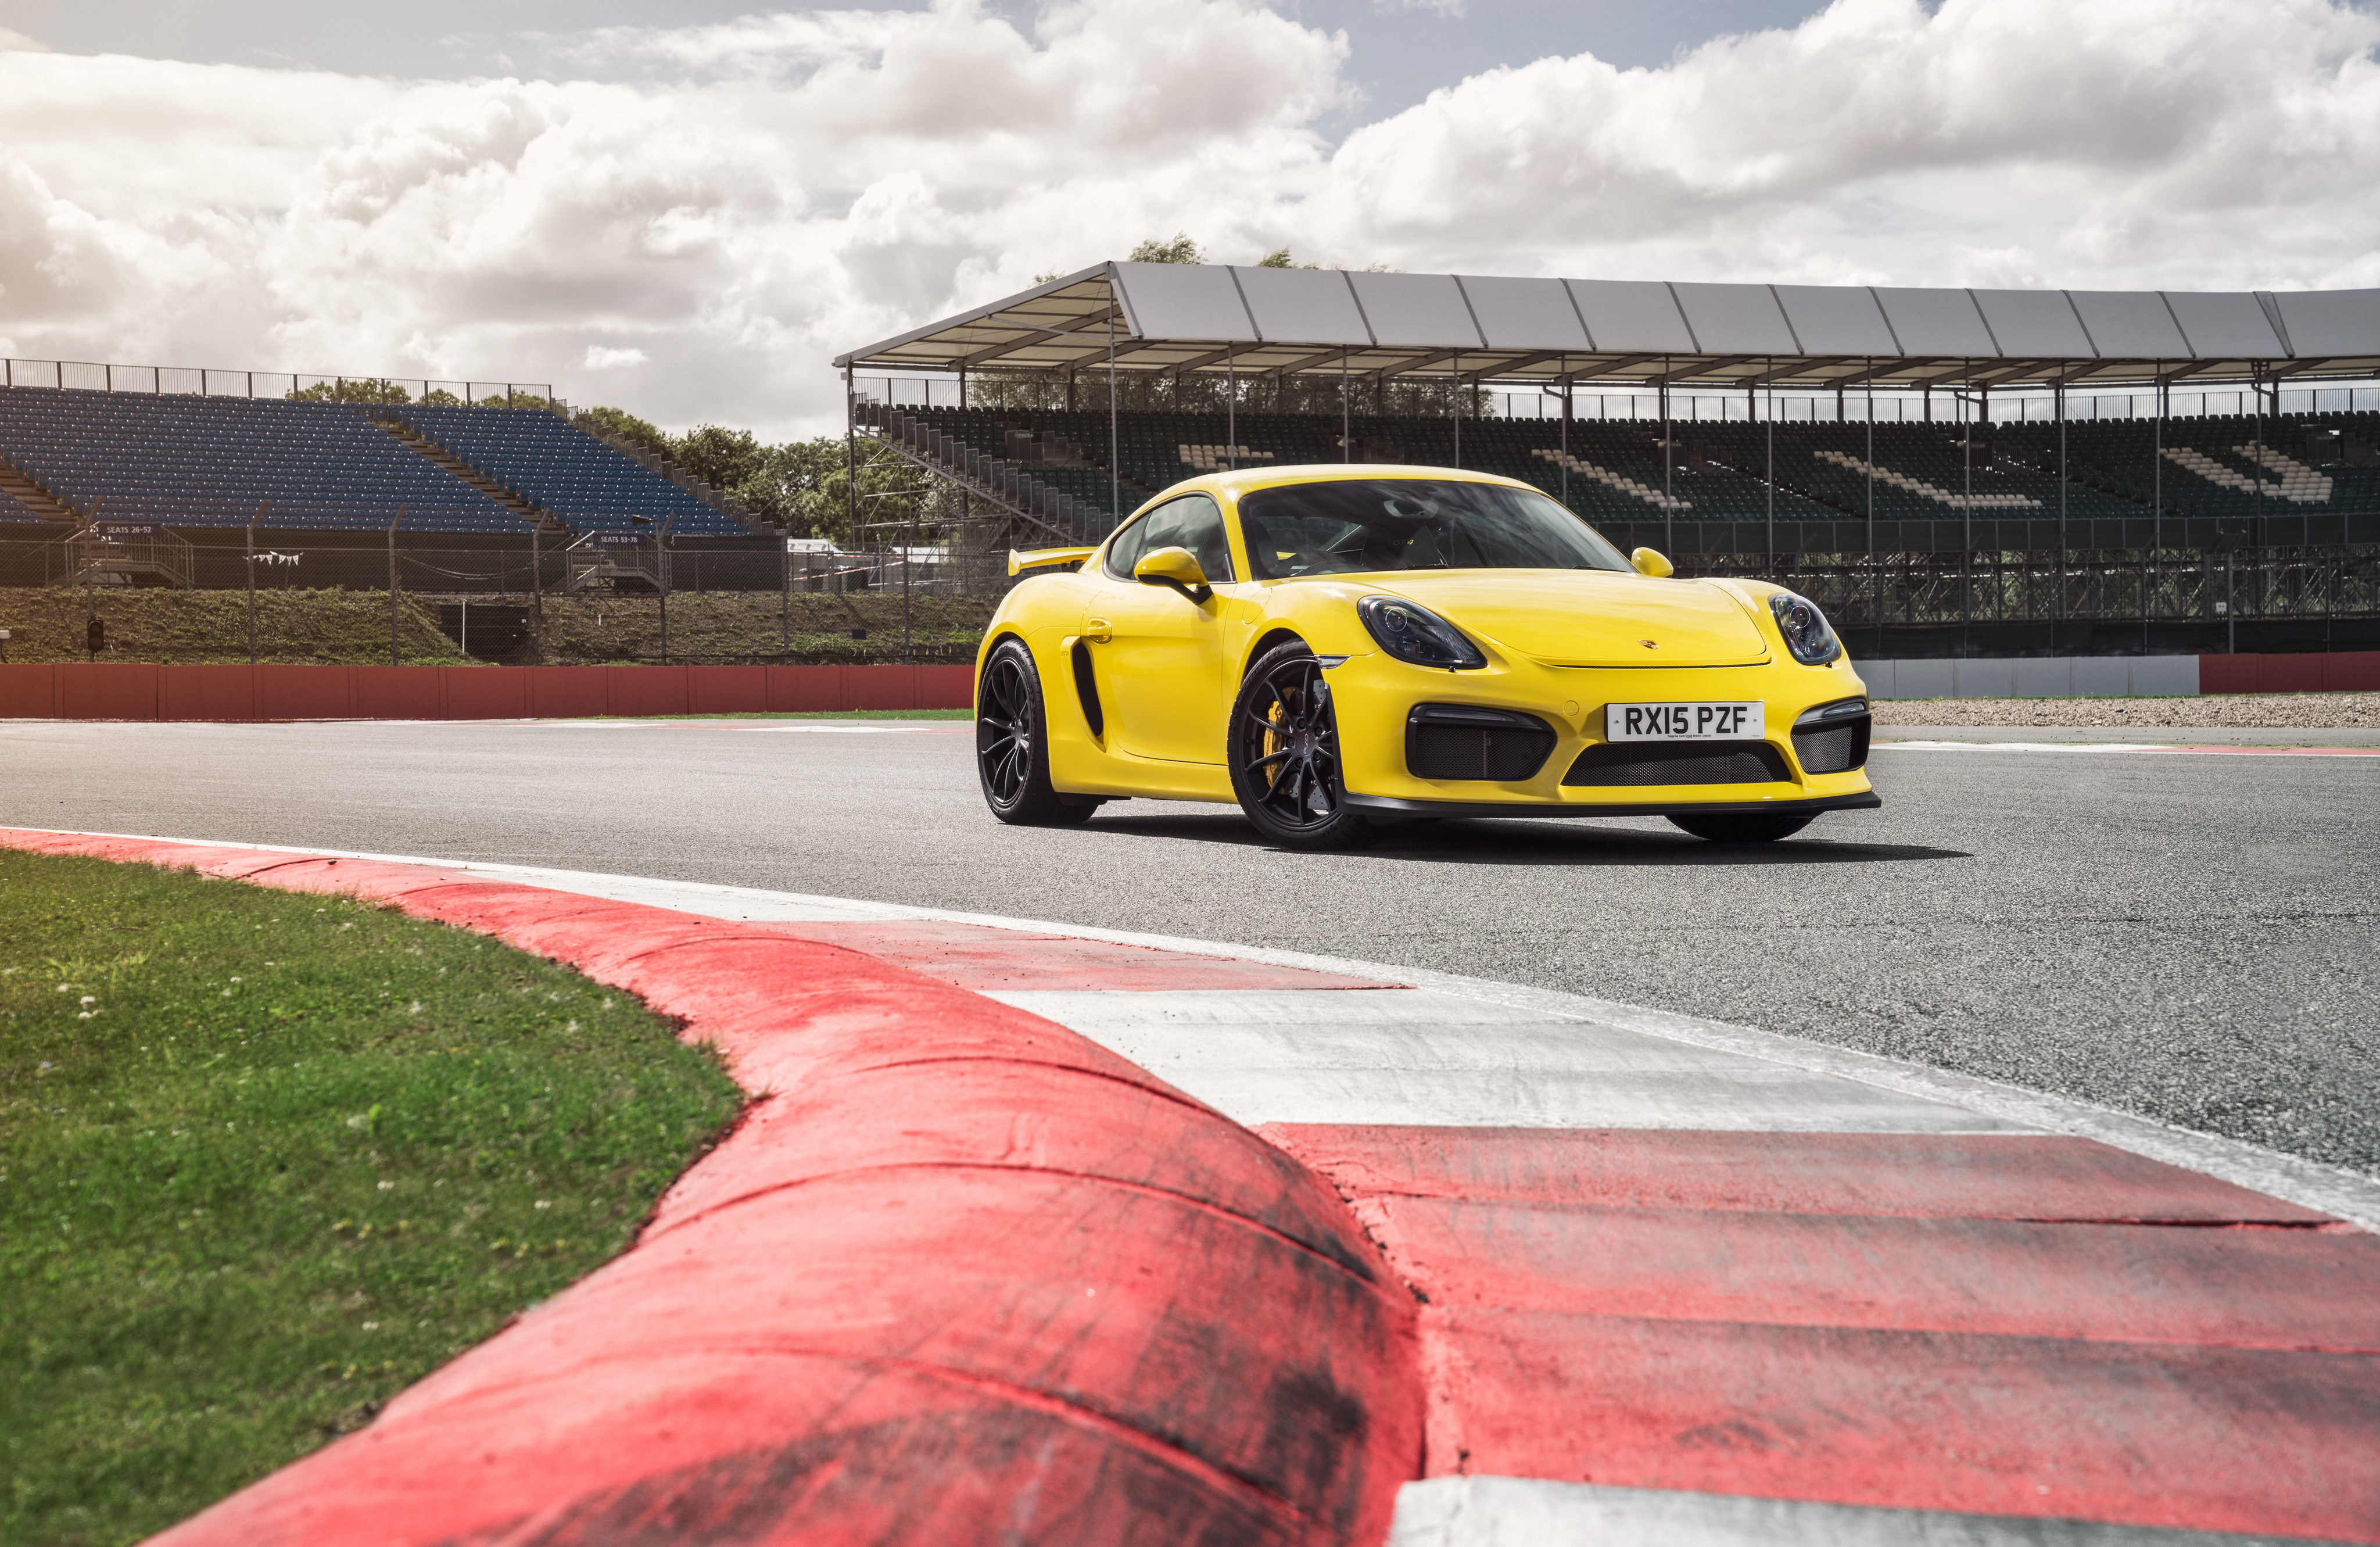 cayman, yellow, gt4, cars New Lock Screen Backgrounds